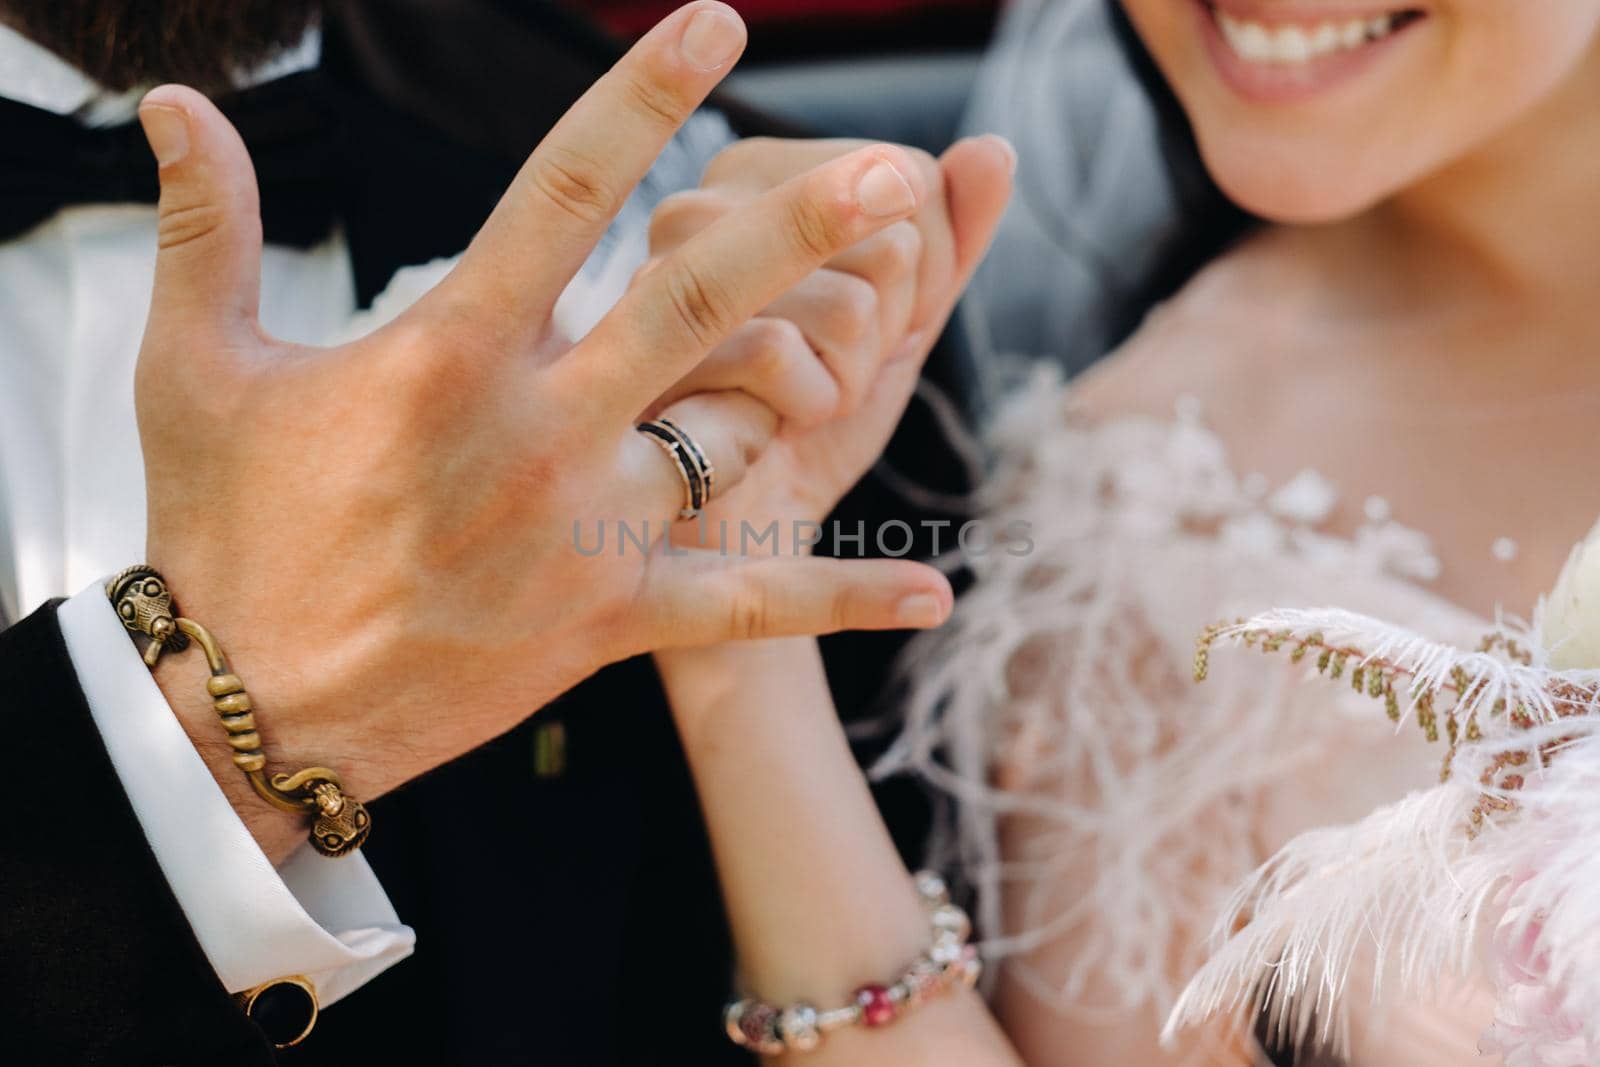 Close-up of the palms of the bride and groom with wedding rings on their hands.